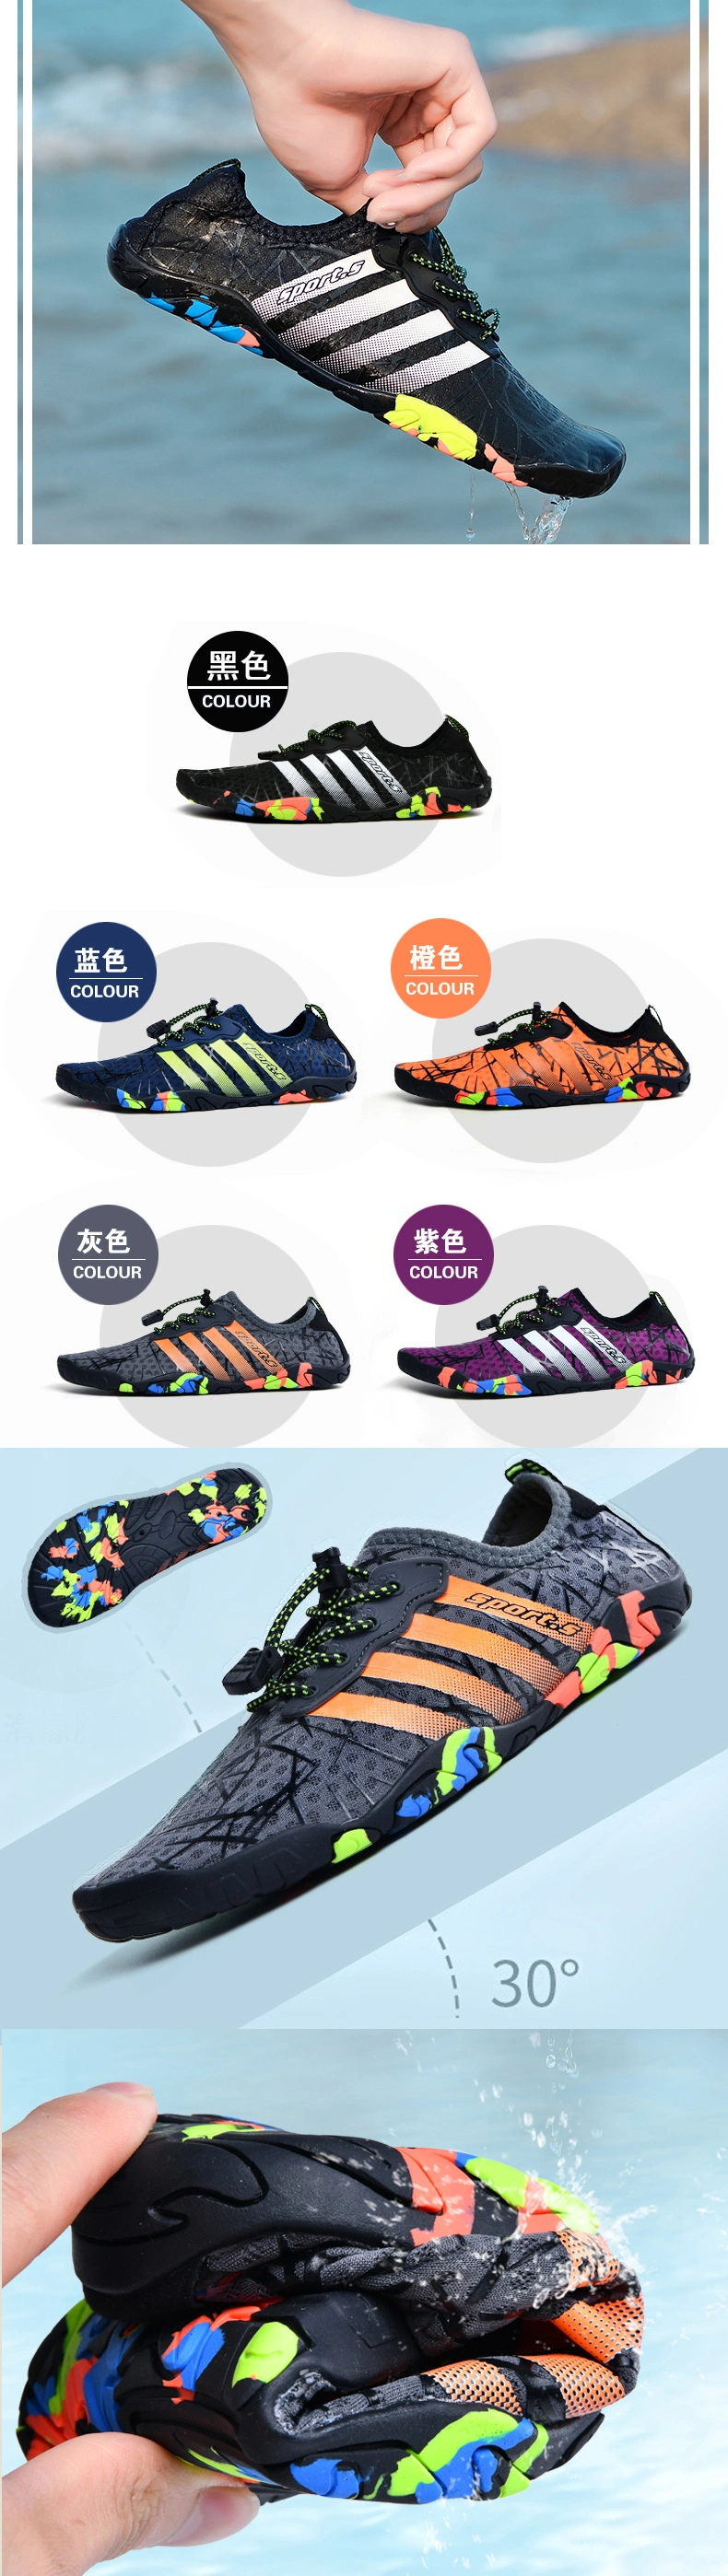 Comfortable Light Diving Non-Slip Quick Dry Hiking Outdoor Water Swim Beach Walking Ladies Fashion Casual Sport Sneaker Shoes